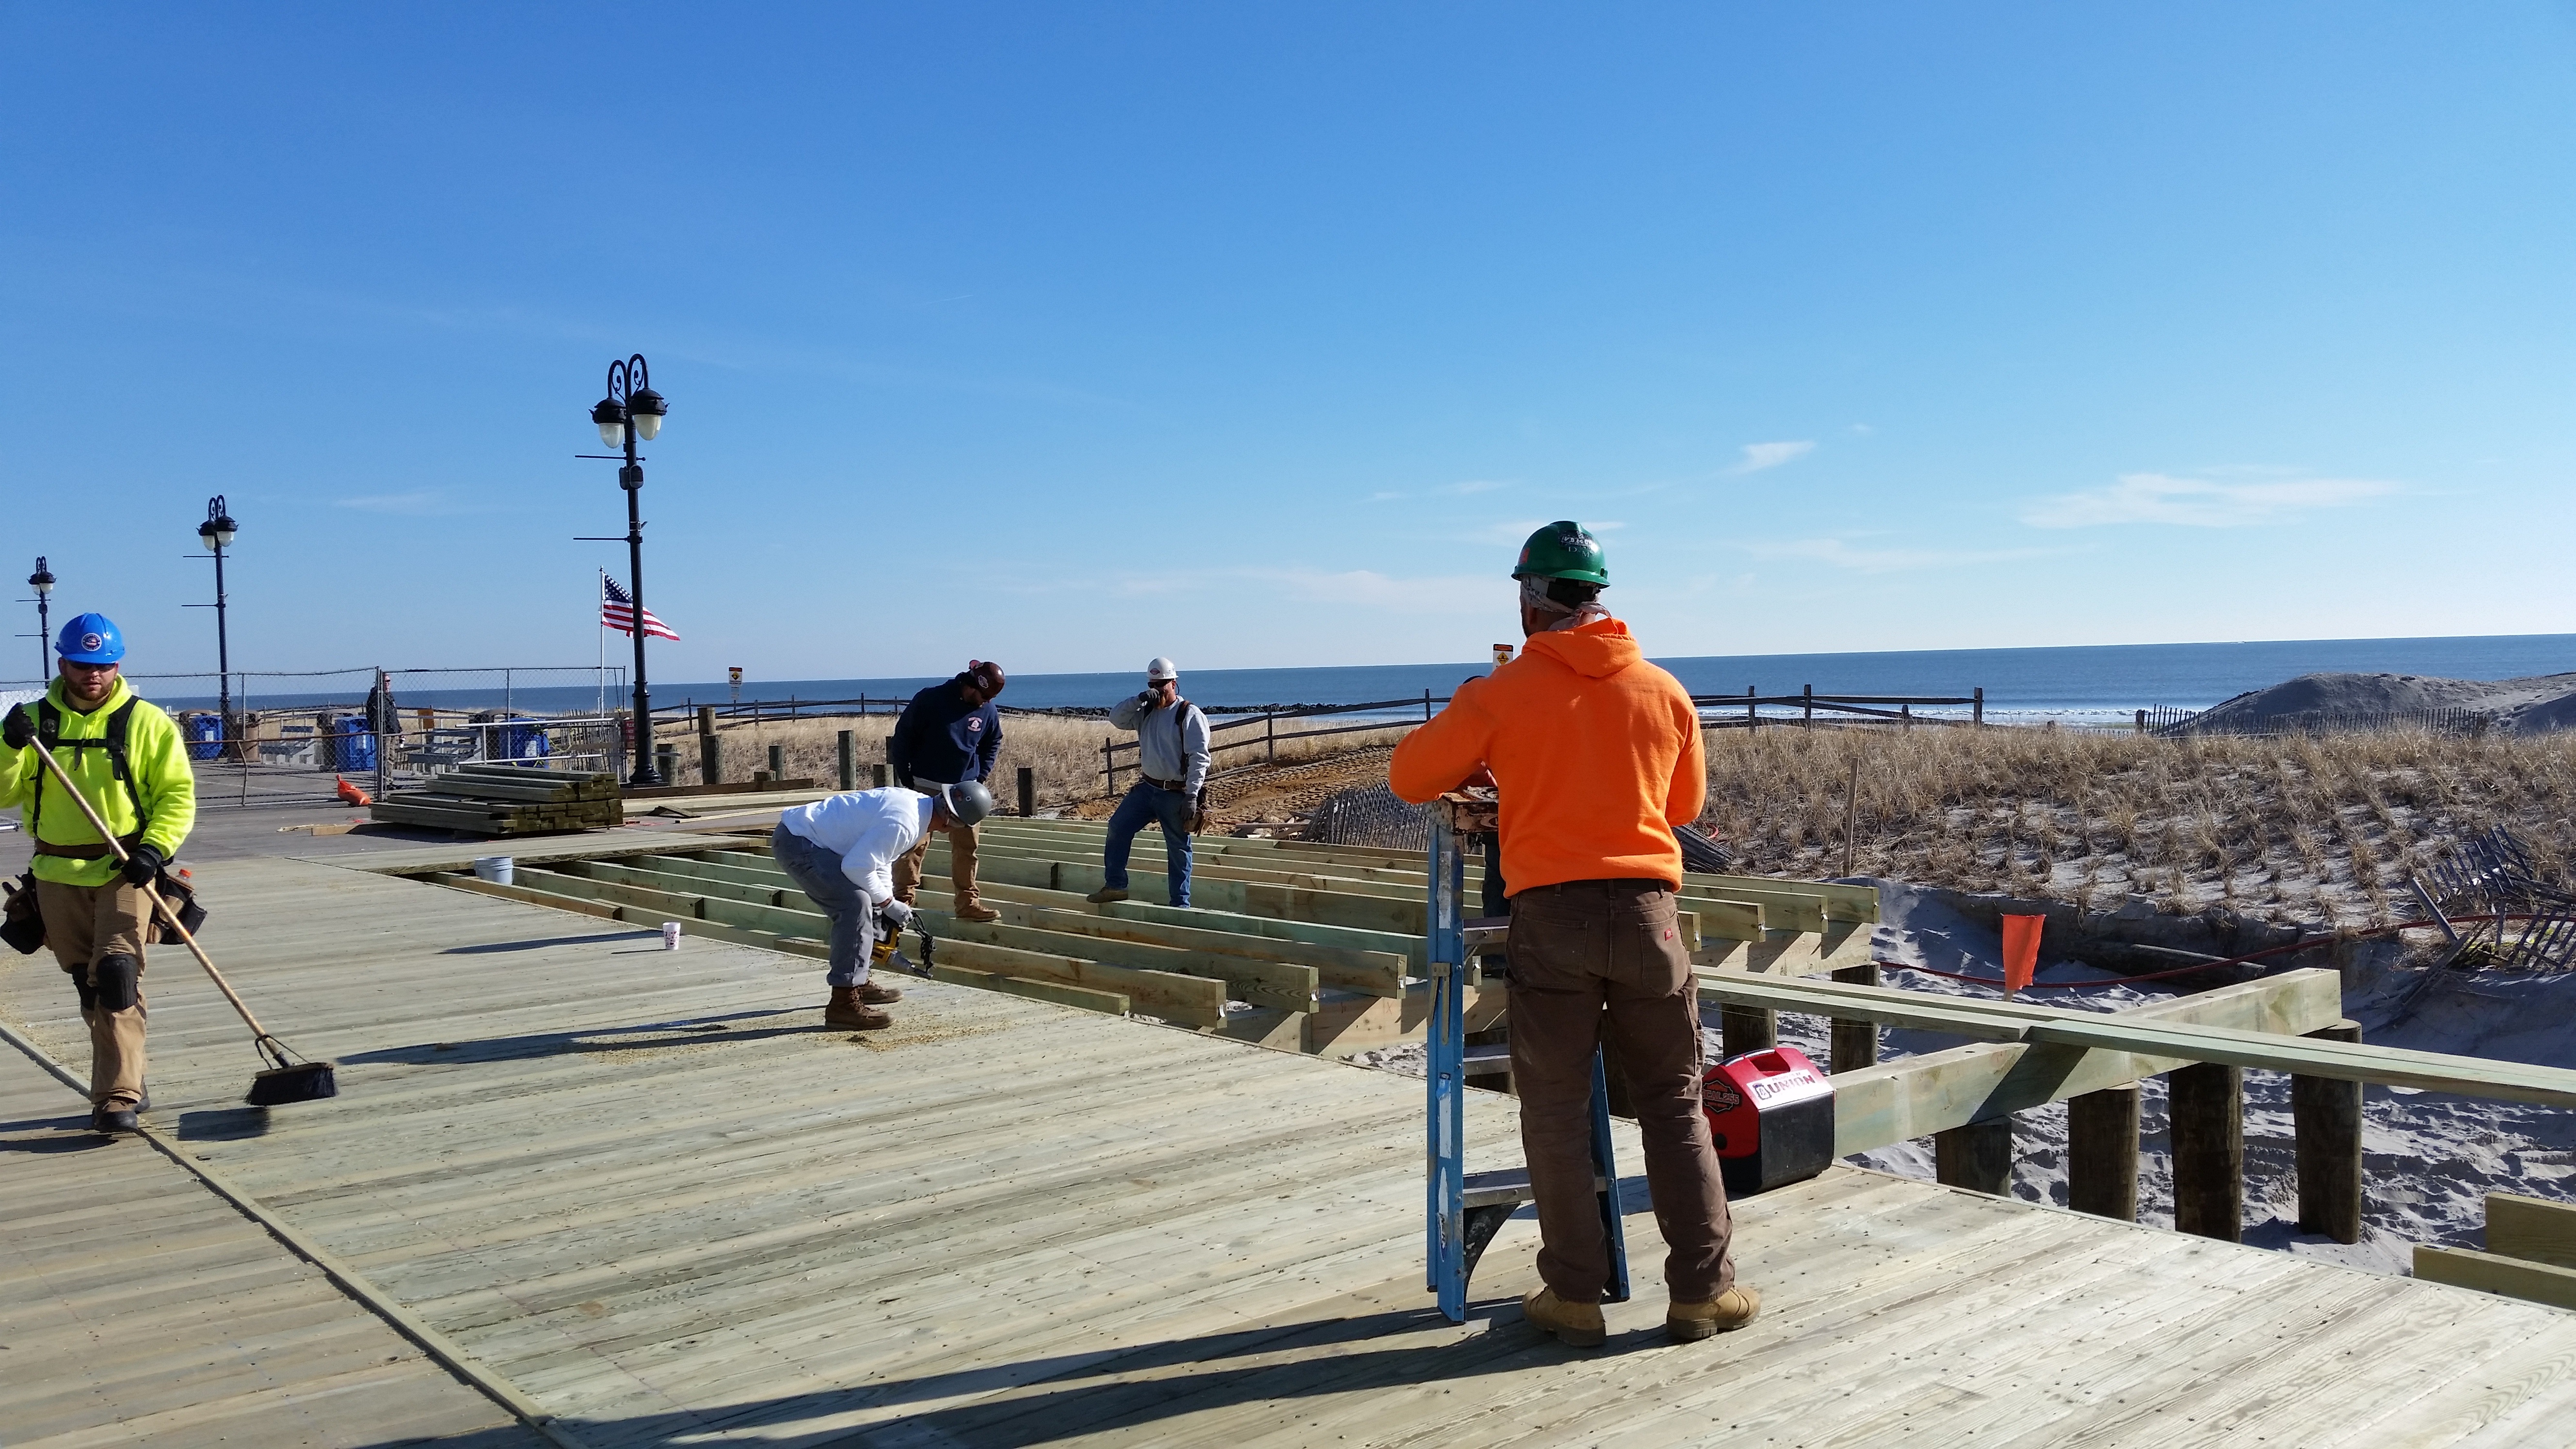 The boardwalk improvements will continue under the new capital plan. 